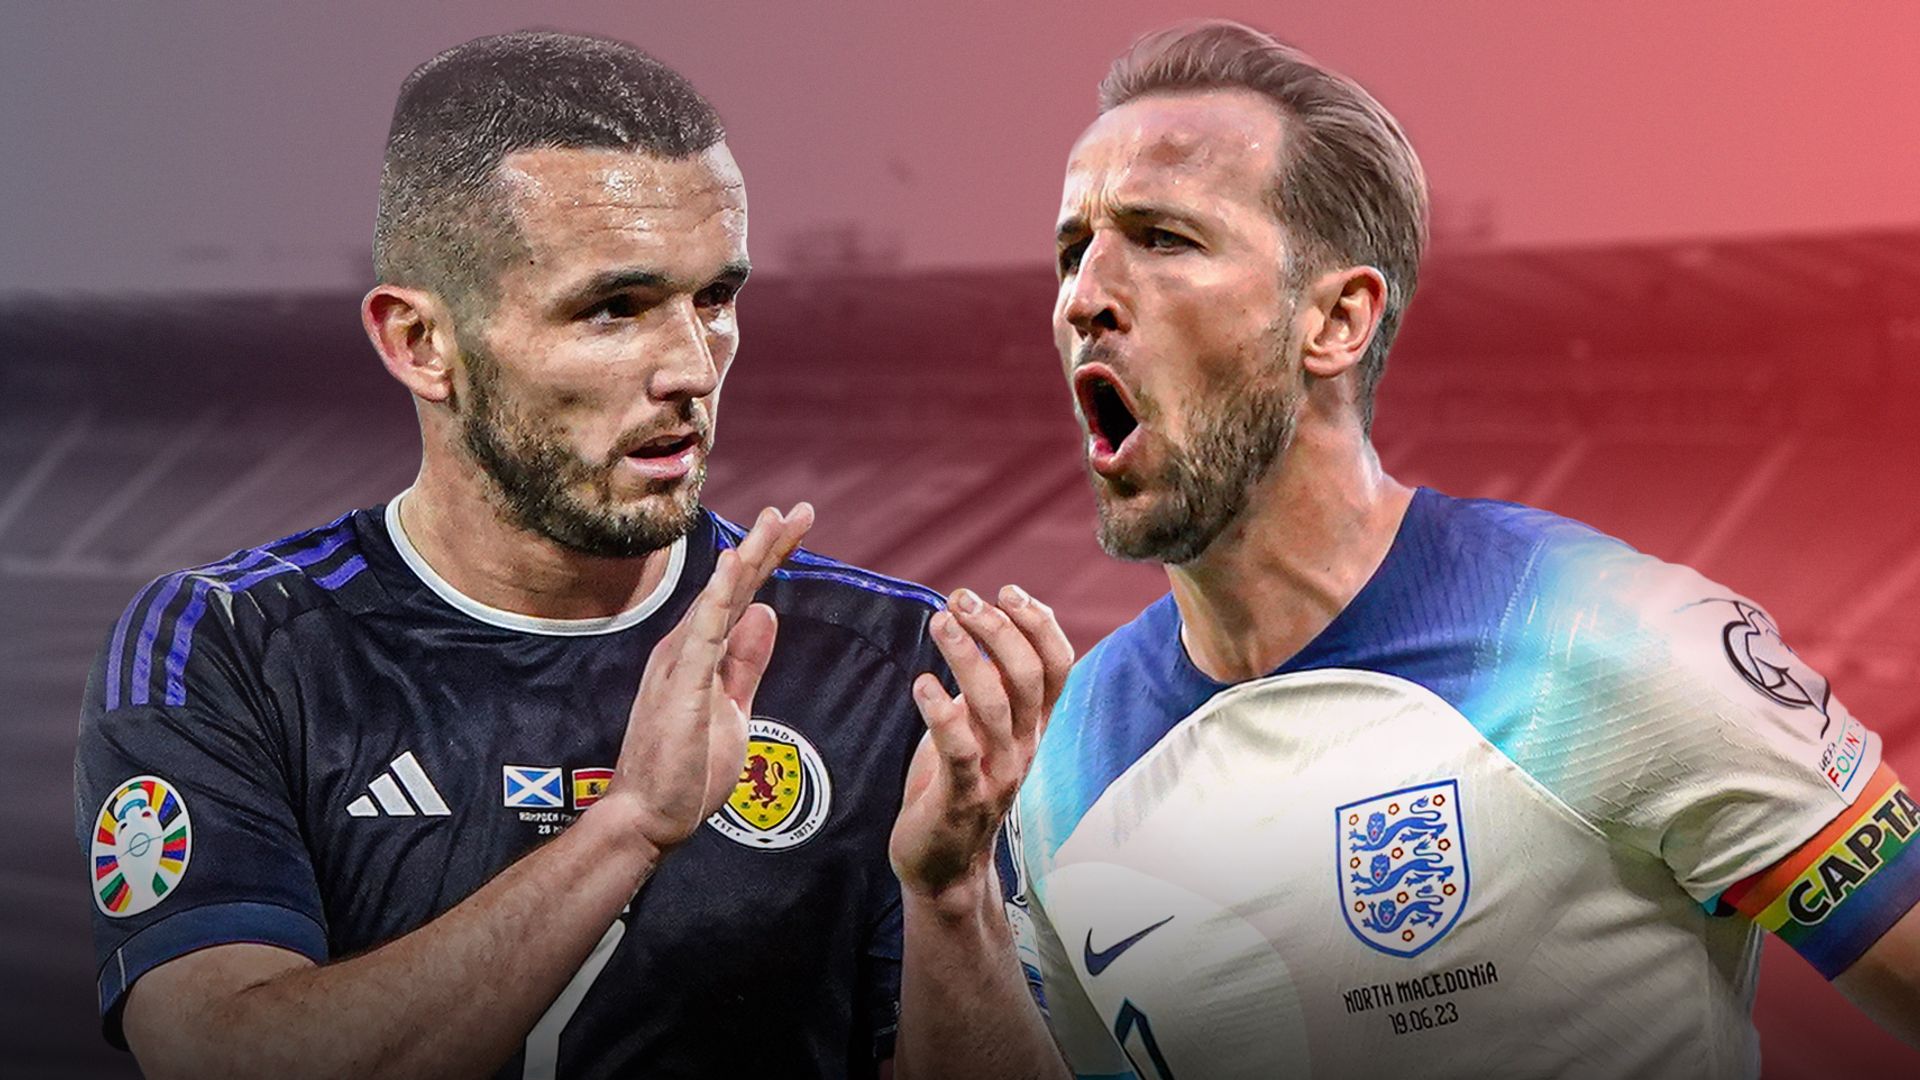 Scotland vs England Q&A: Send in YOUR questions!